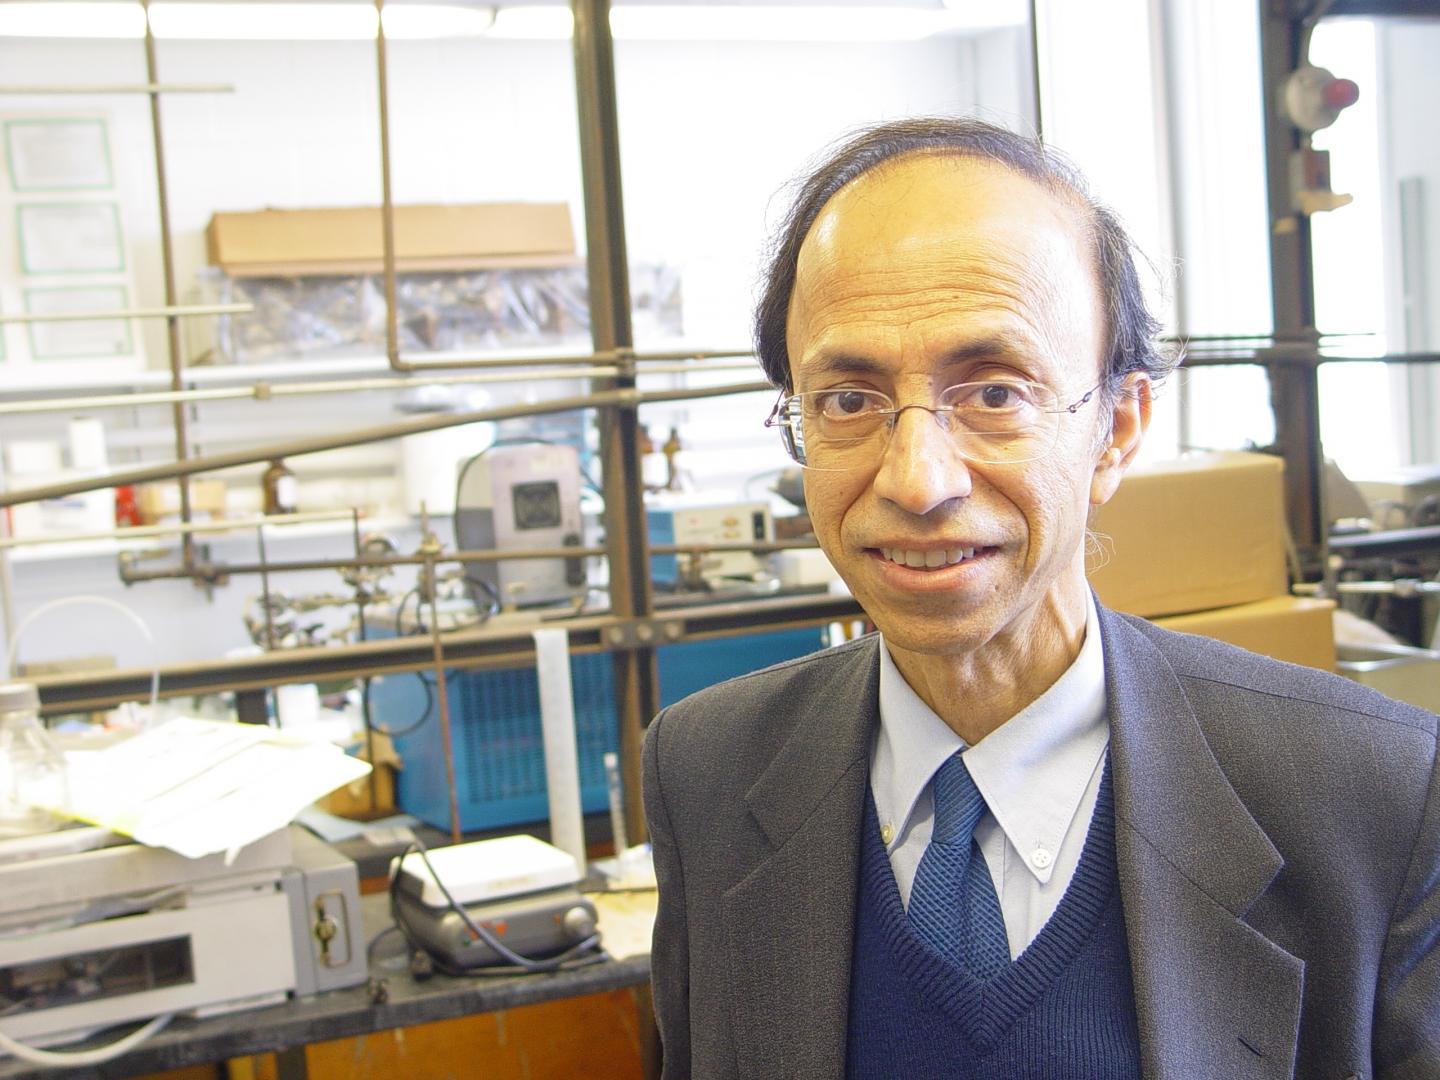 NJIT's Kamalesh Sirkar Wins a Coveted Award for Innovation in Membrane Science and Technology